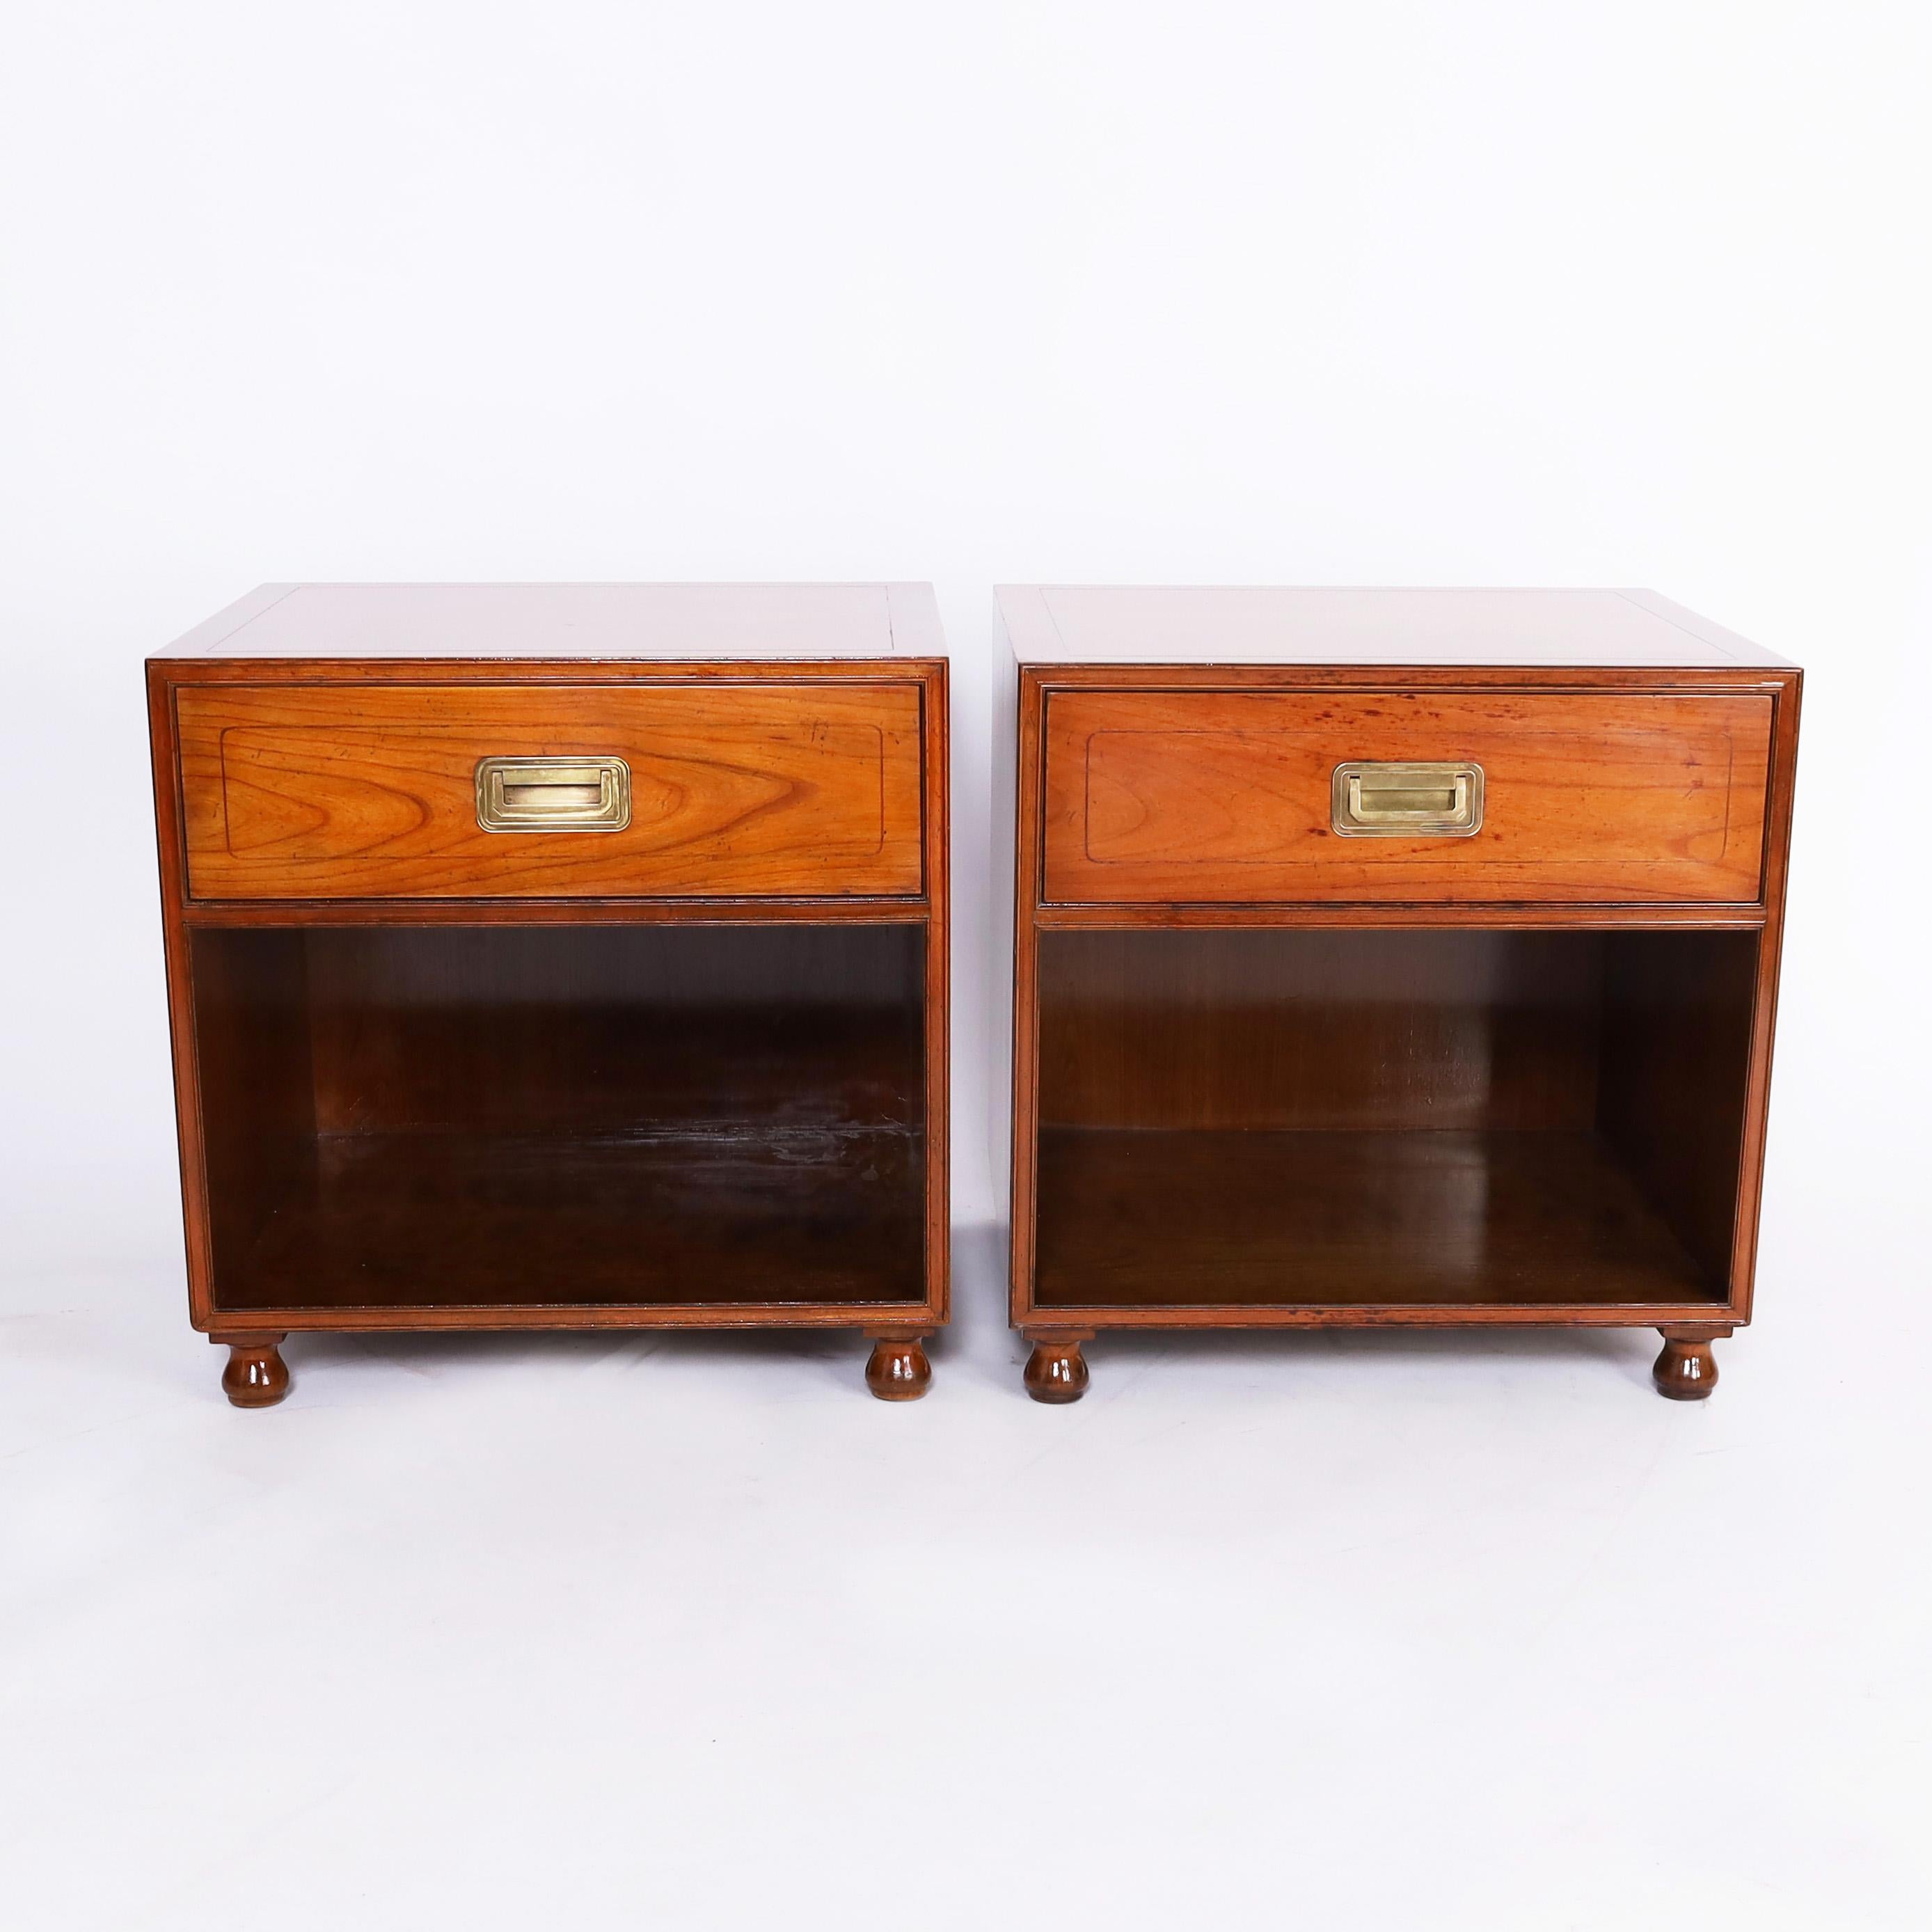 Mid century pair of stands crafted in fruitwood in a modern form with campaign hardware, one drawer, lower storage, and turned feet. Signed Baker in a drawer. 